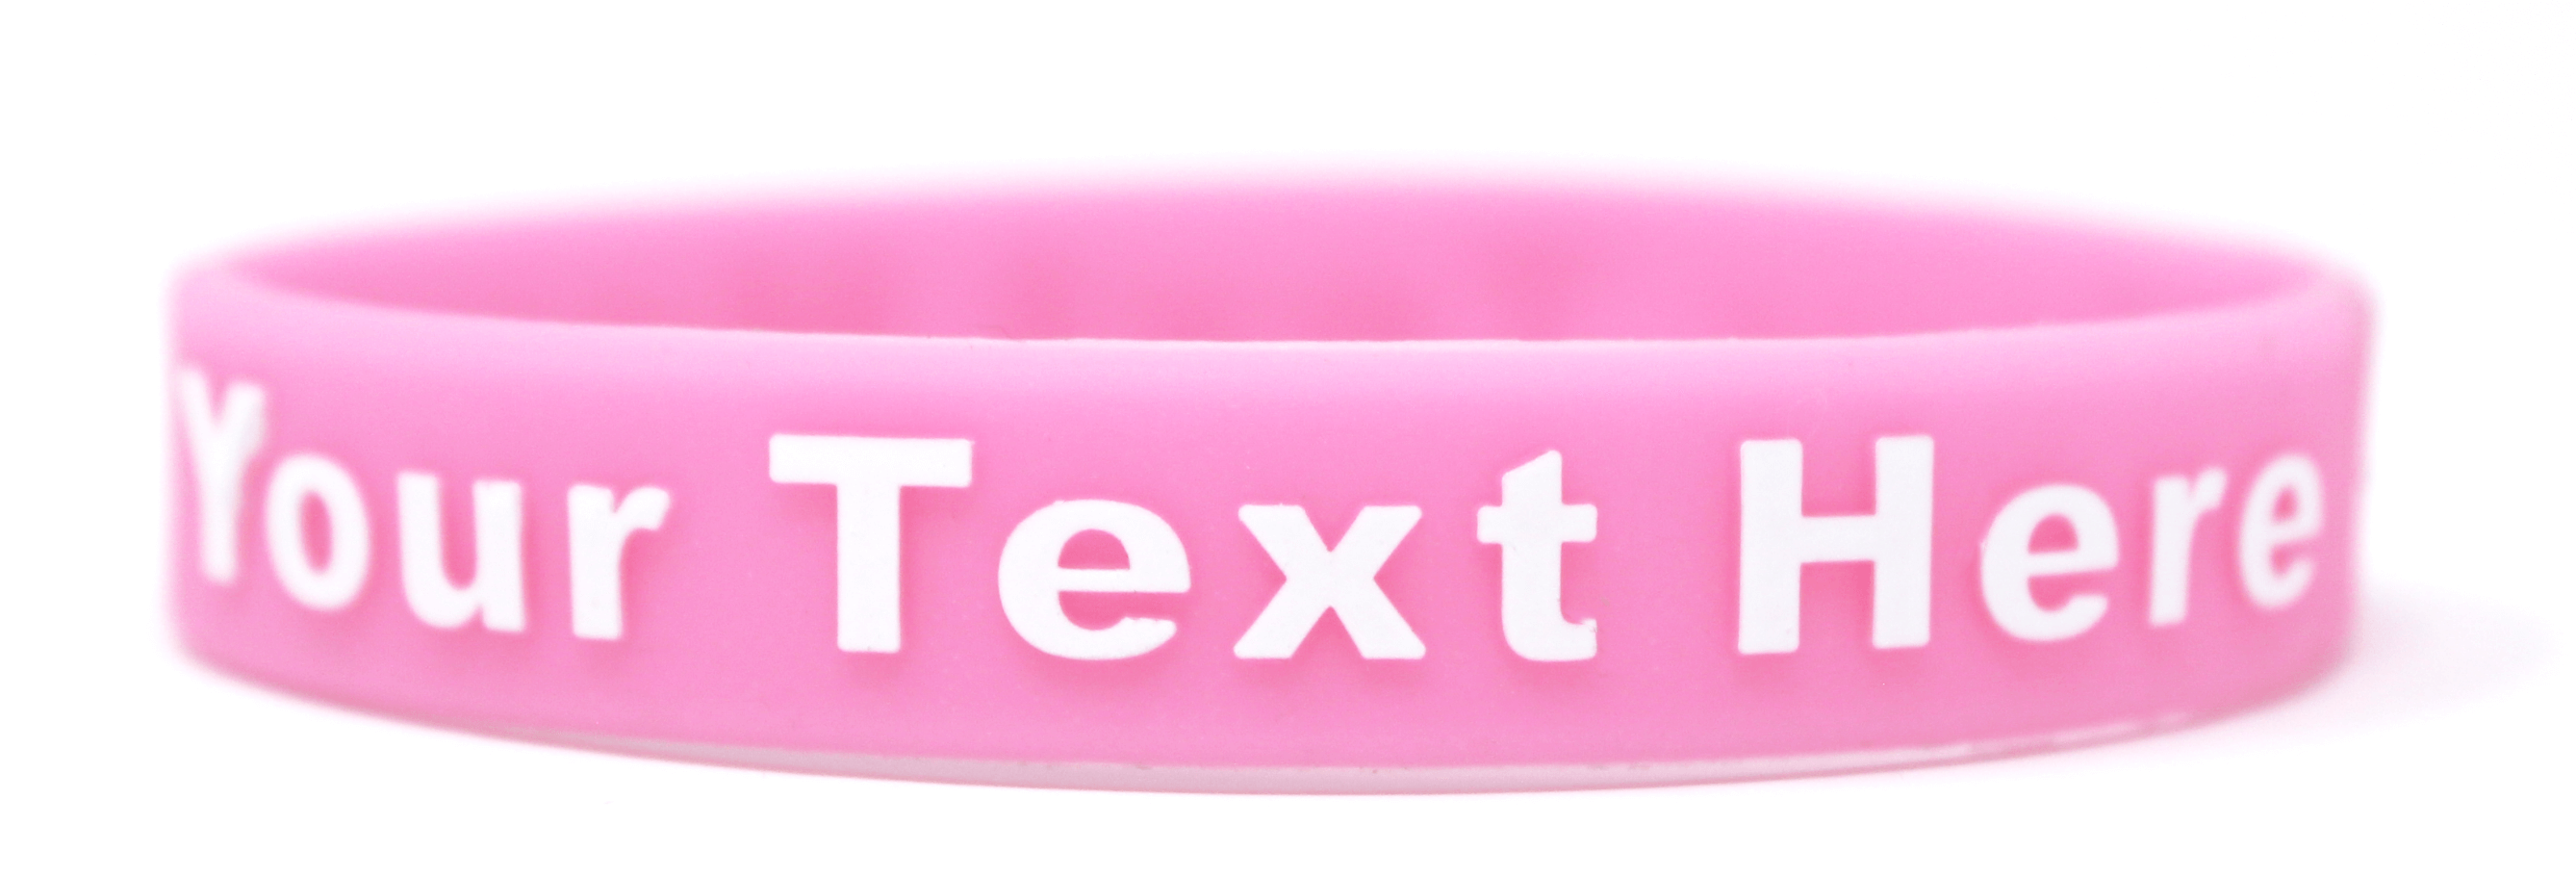 Pink wristband presents breast cancer and women's health.